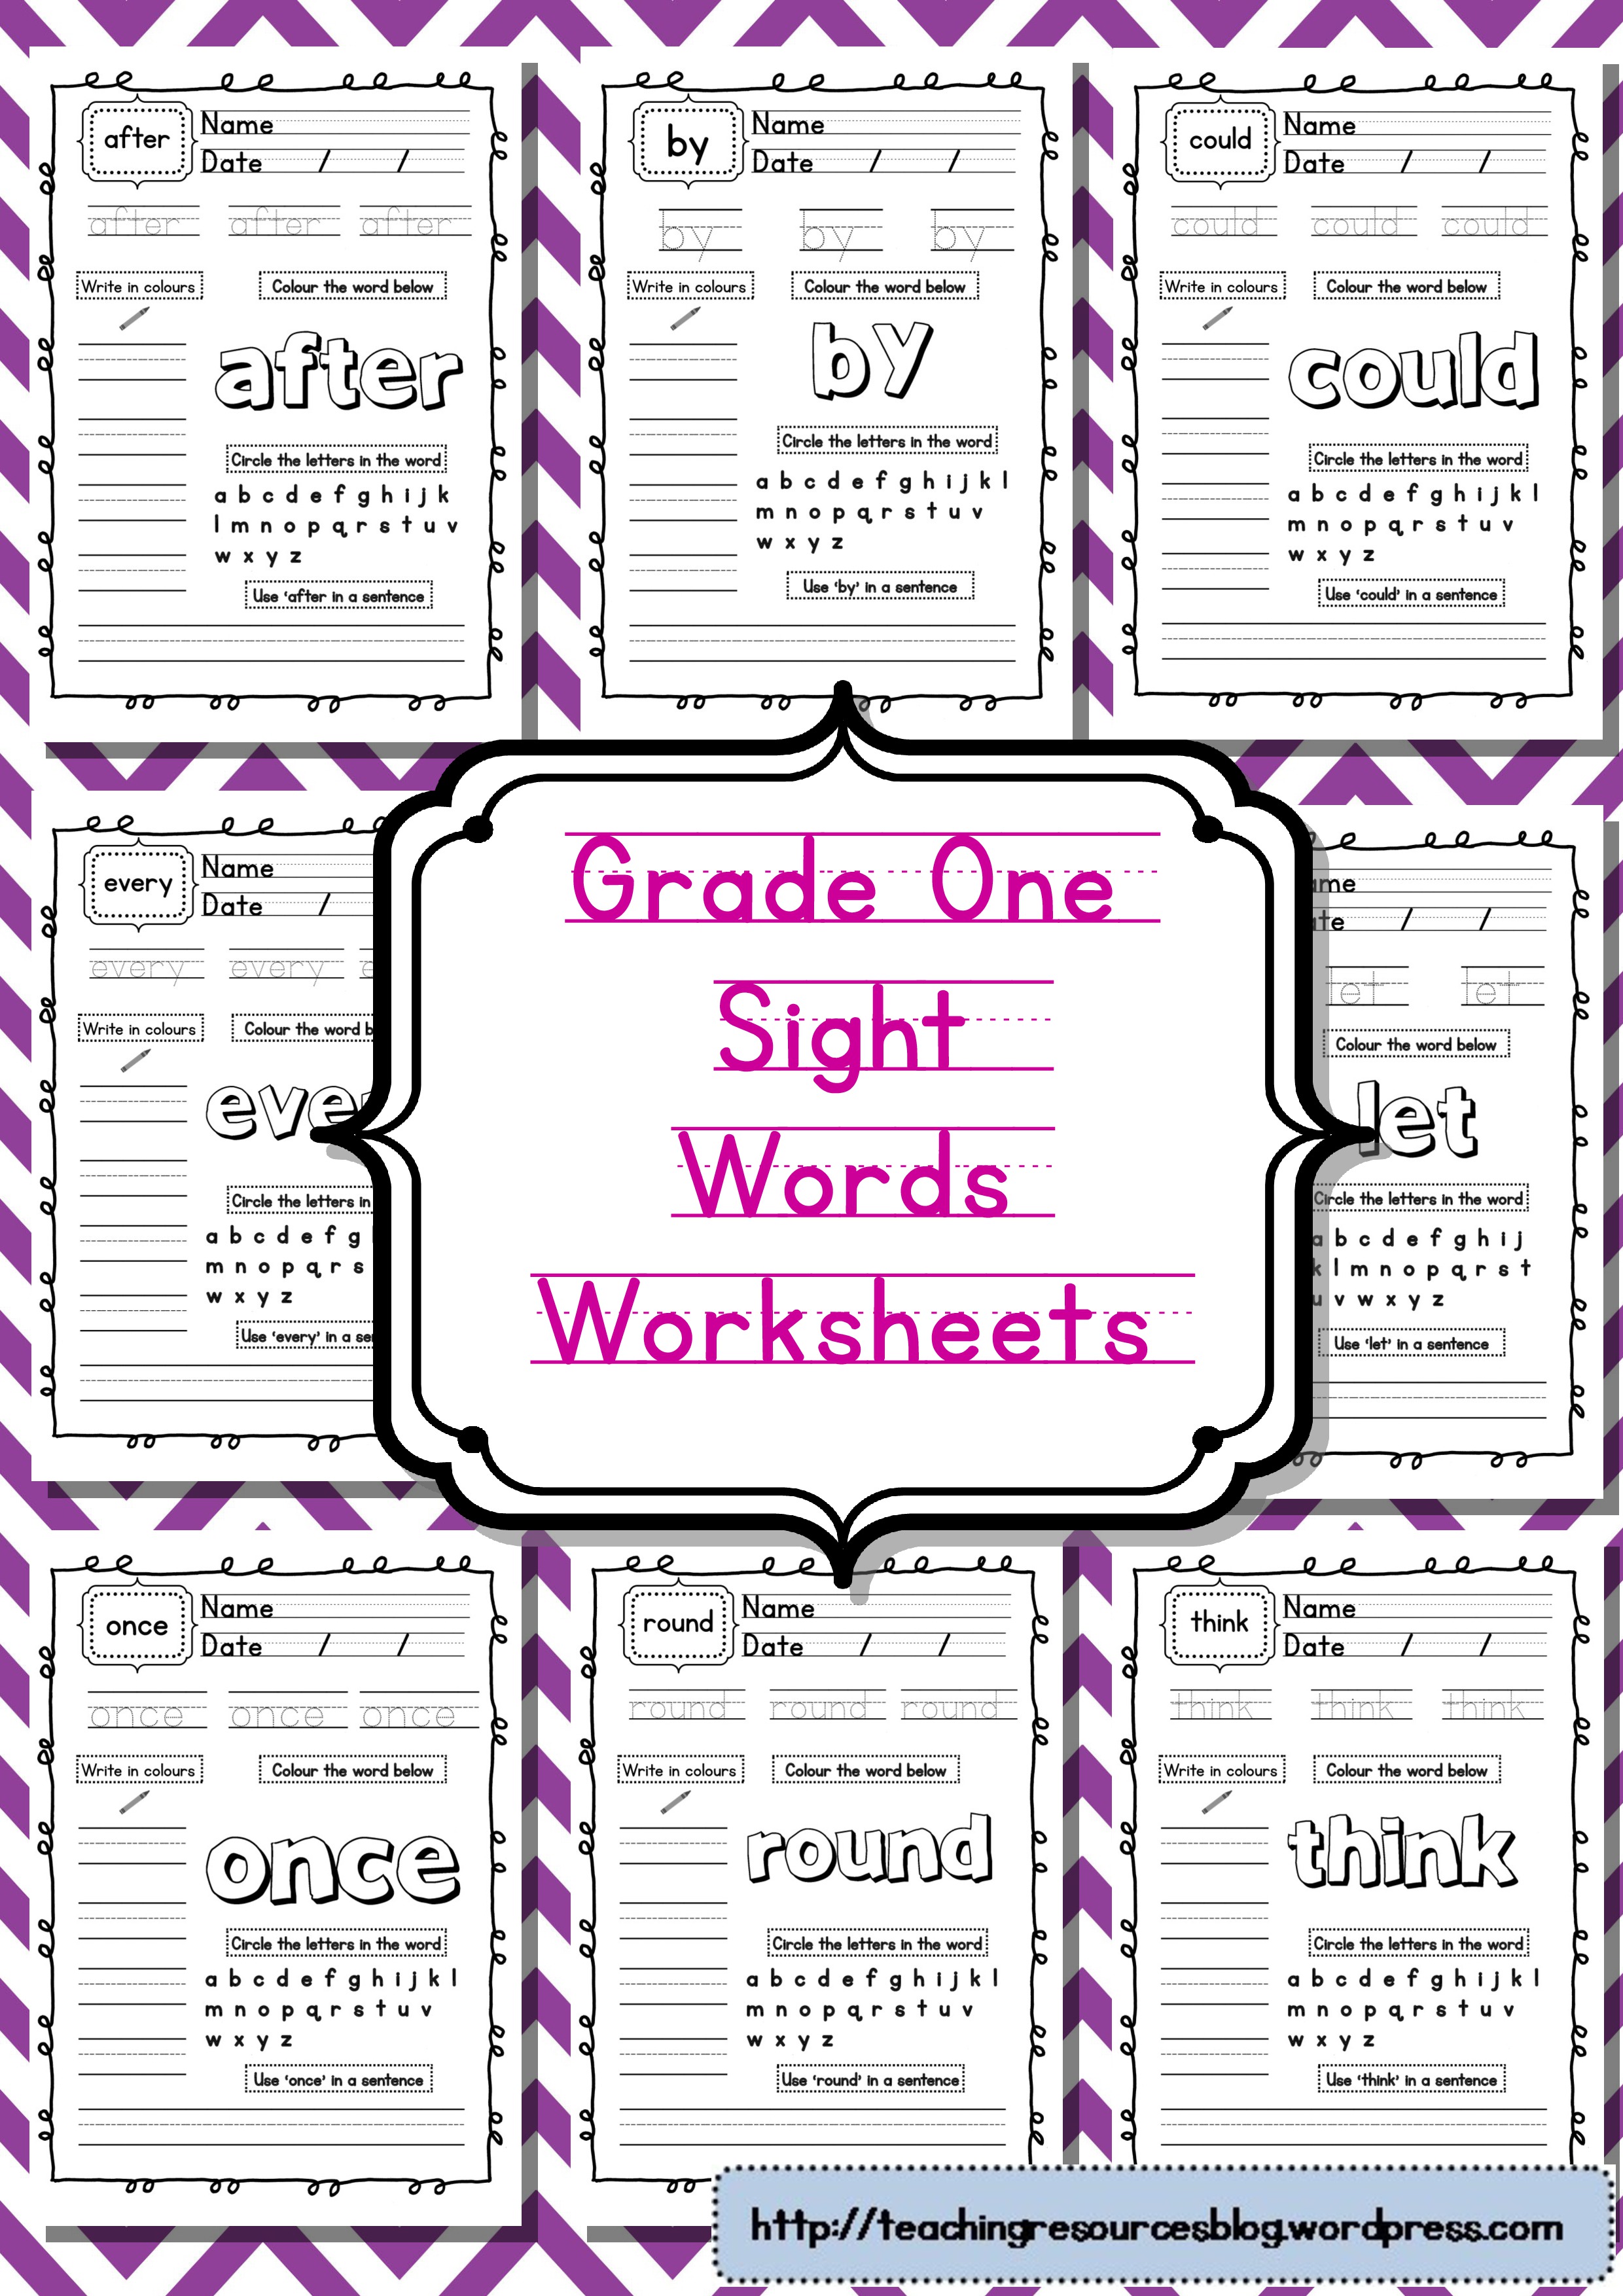 grade one sight words front cover page 0